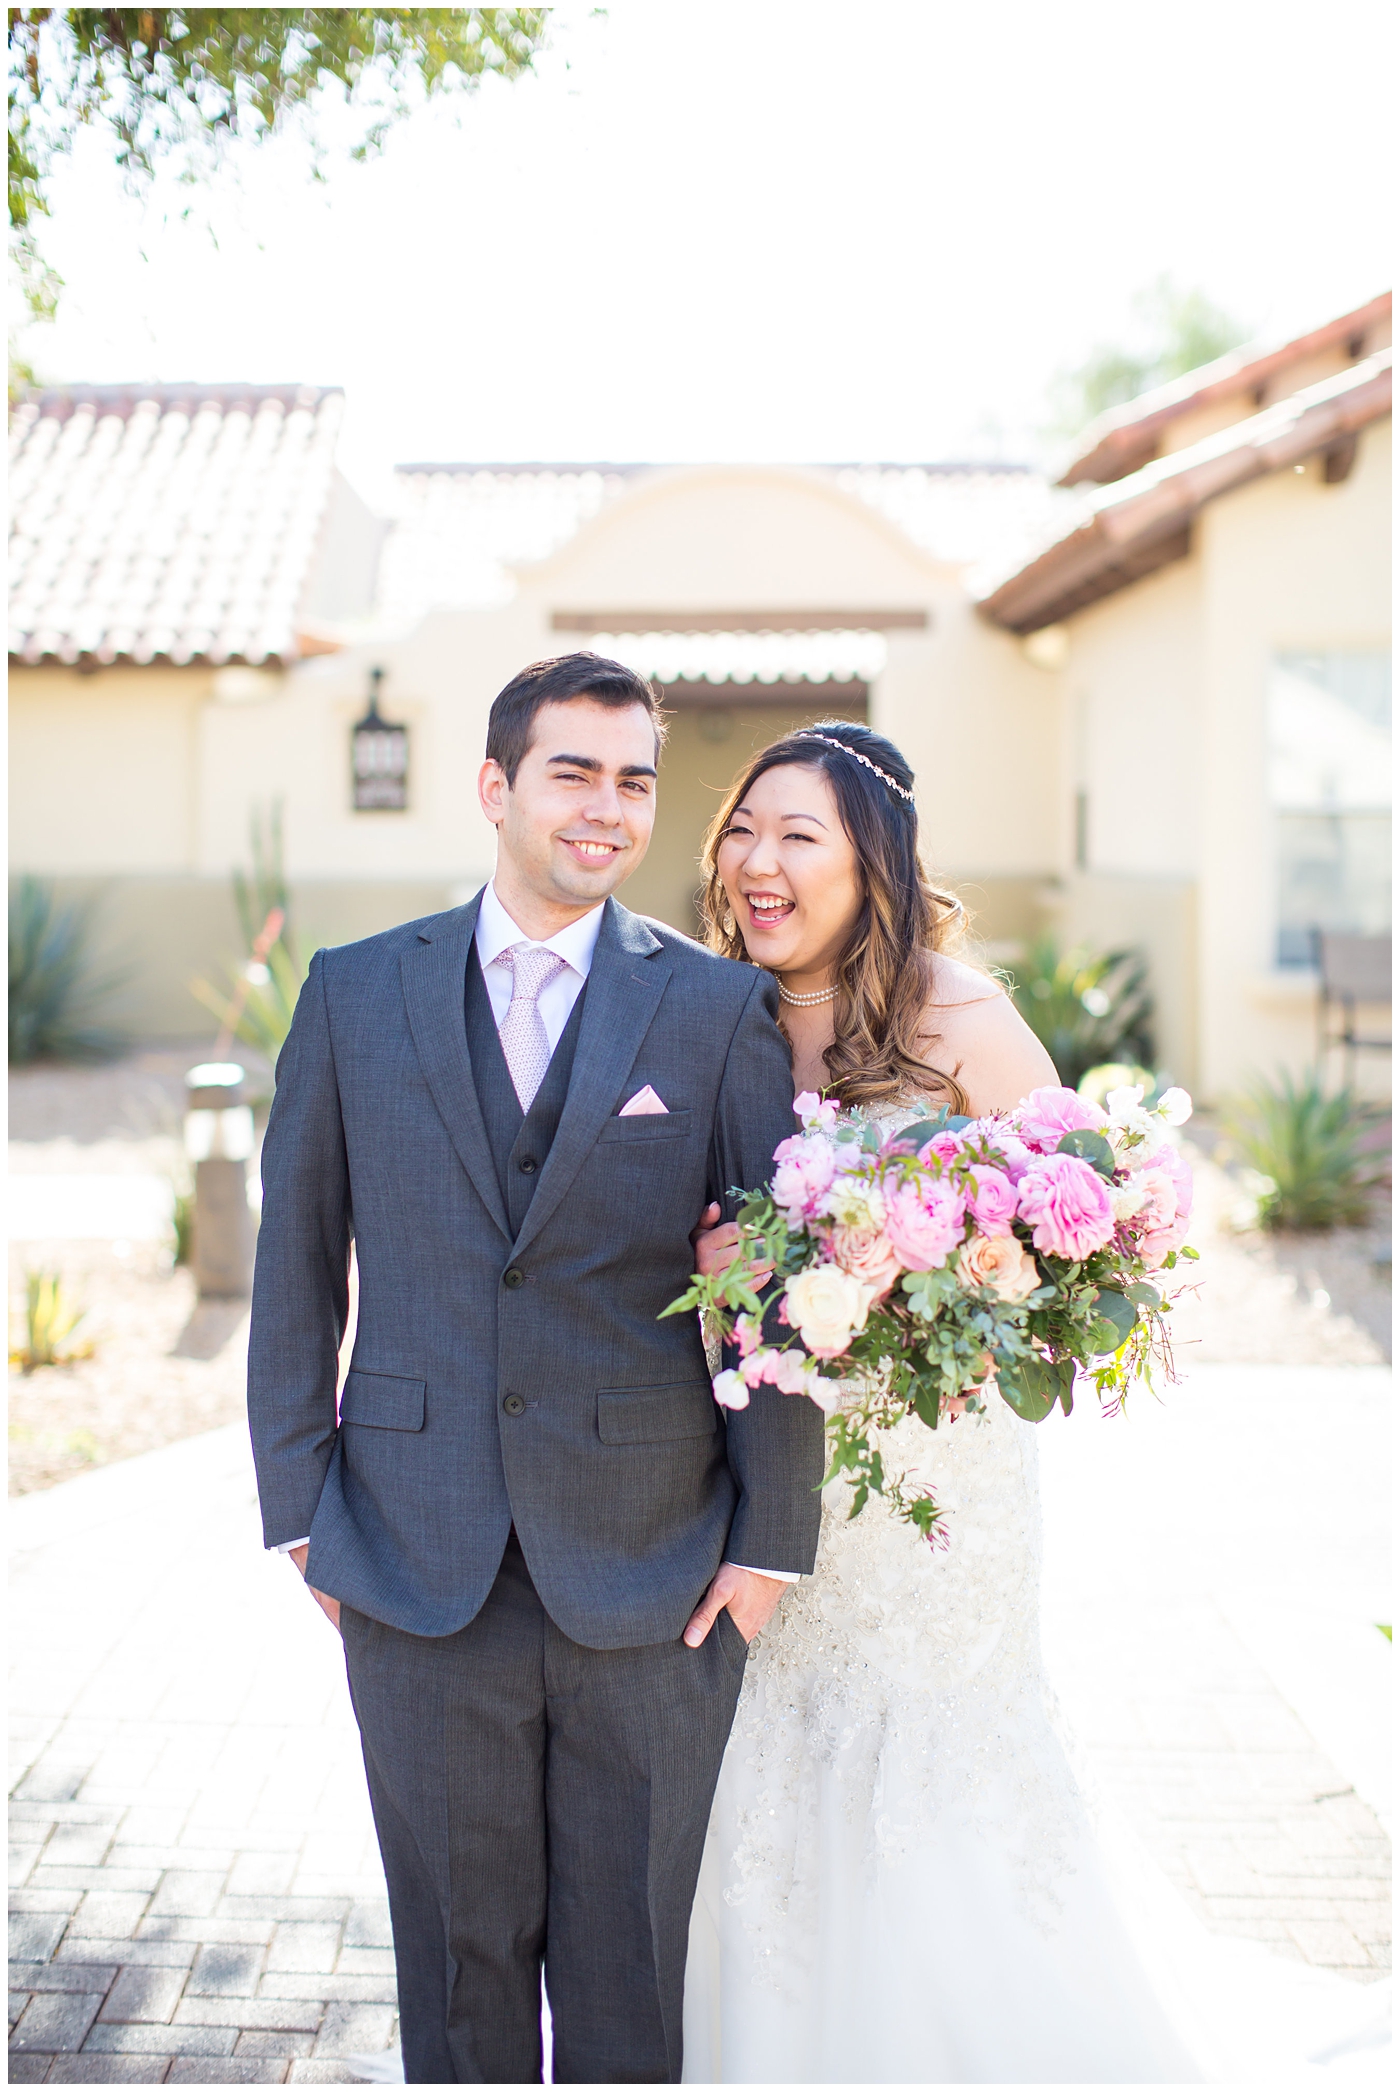 bride in strapless wedding dress with beads and shiny sparkle tool holding pink peony, roses, light coral rose and loose greenery bridal bouquet with groom in gray suit with silver tie on wedding day portrait